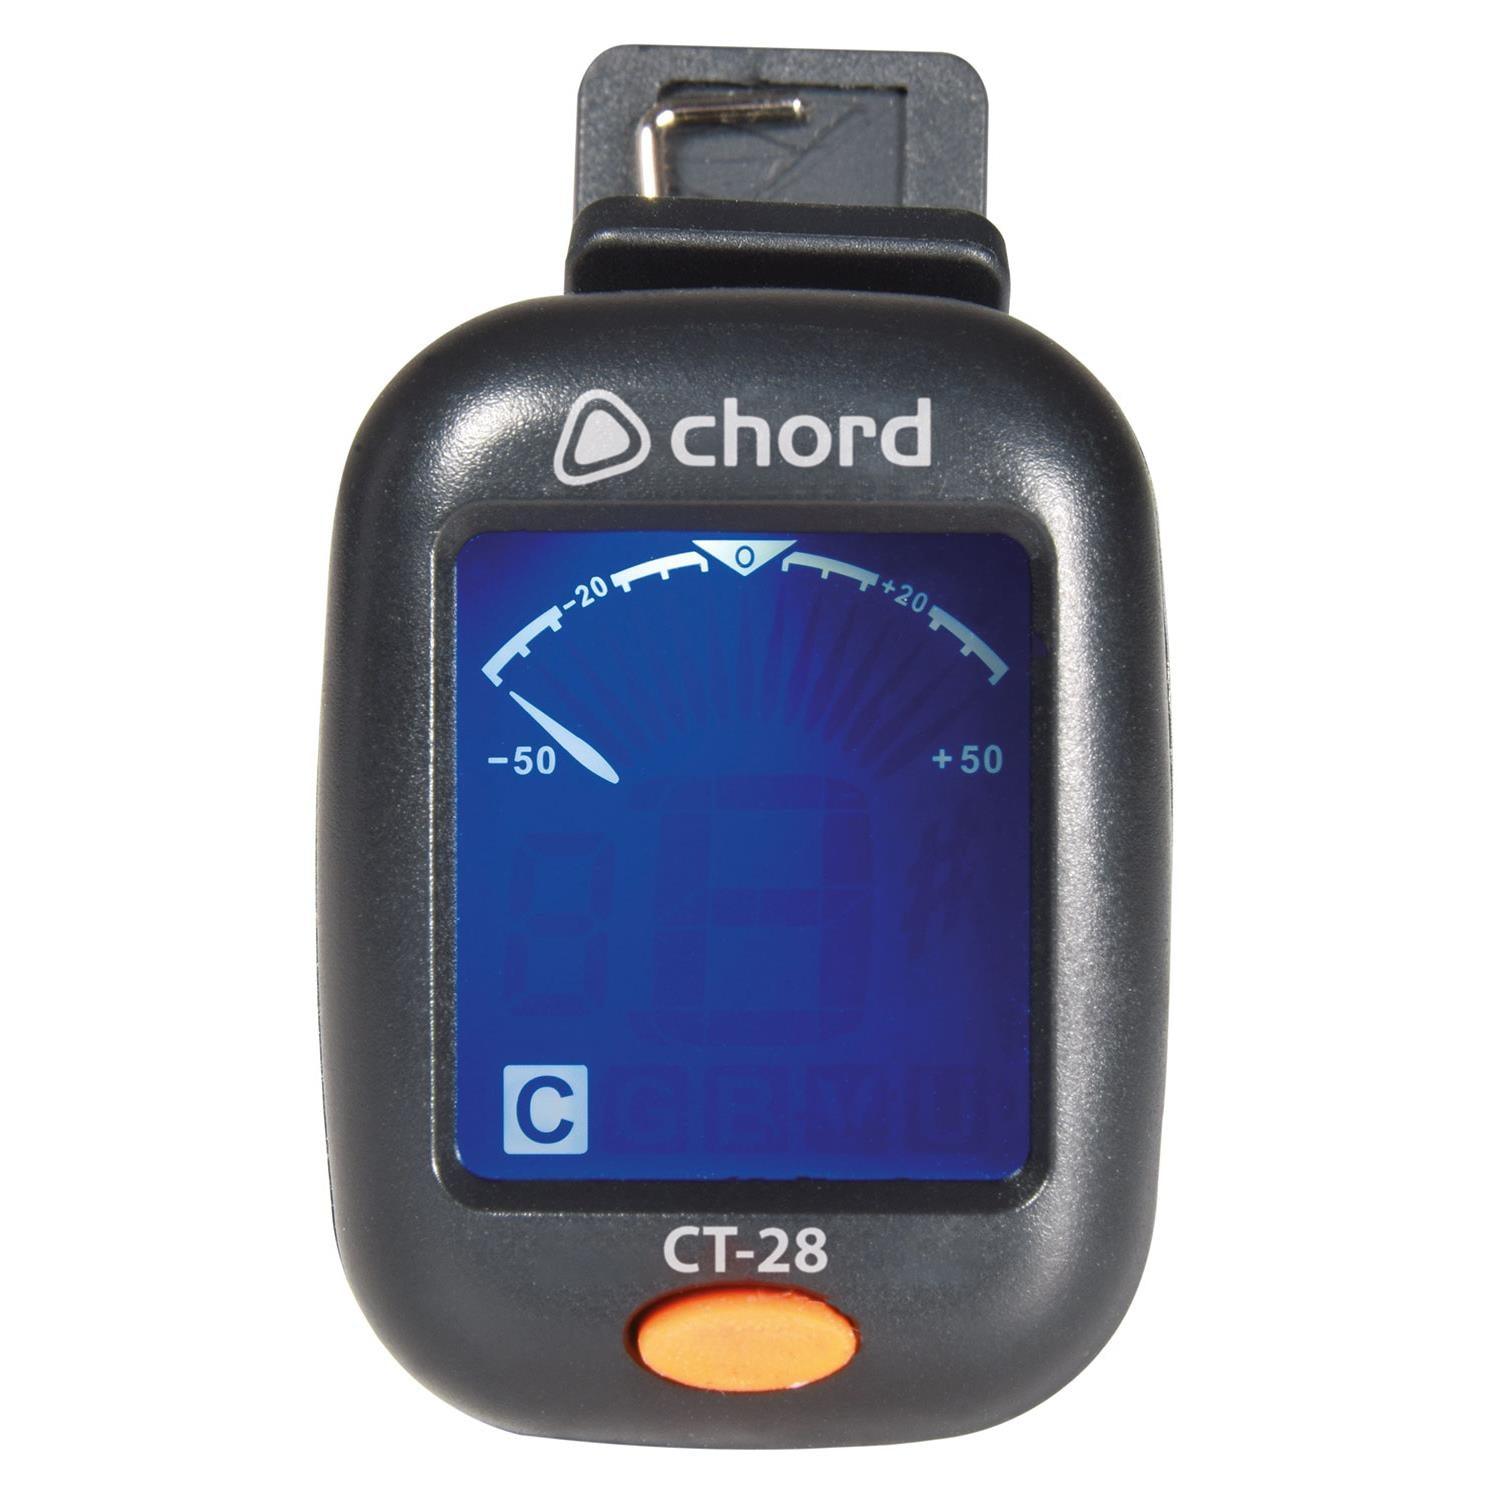 Chord CT-28 Compact Clip Tuner - DY Pro Audio